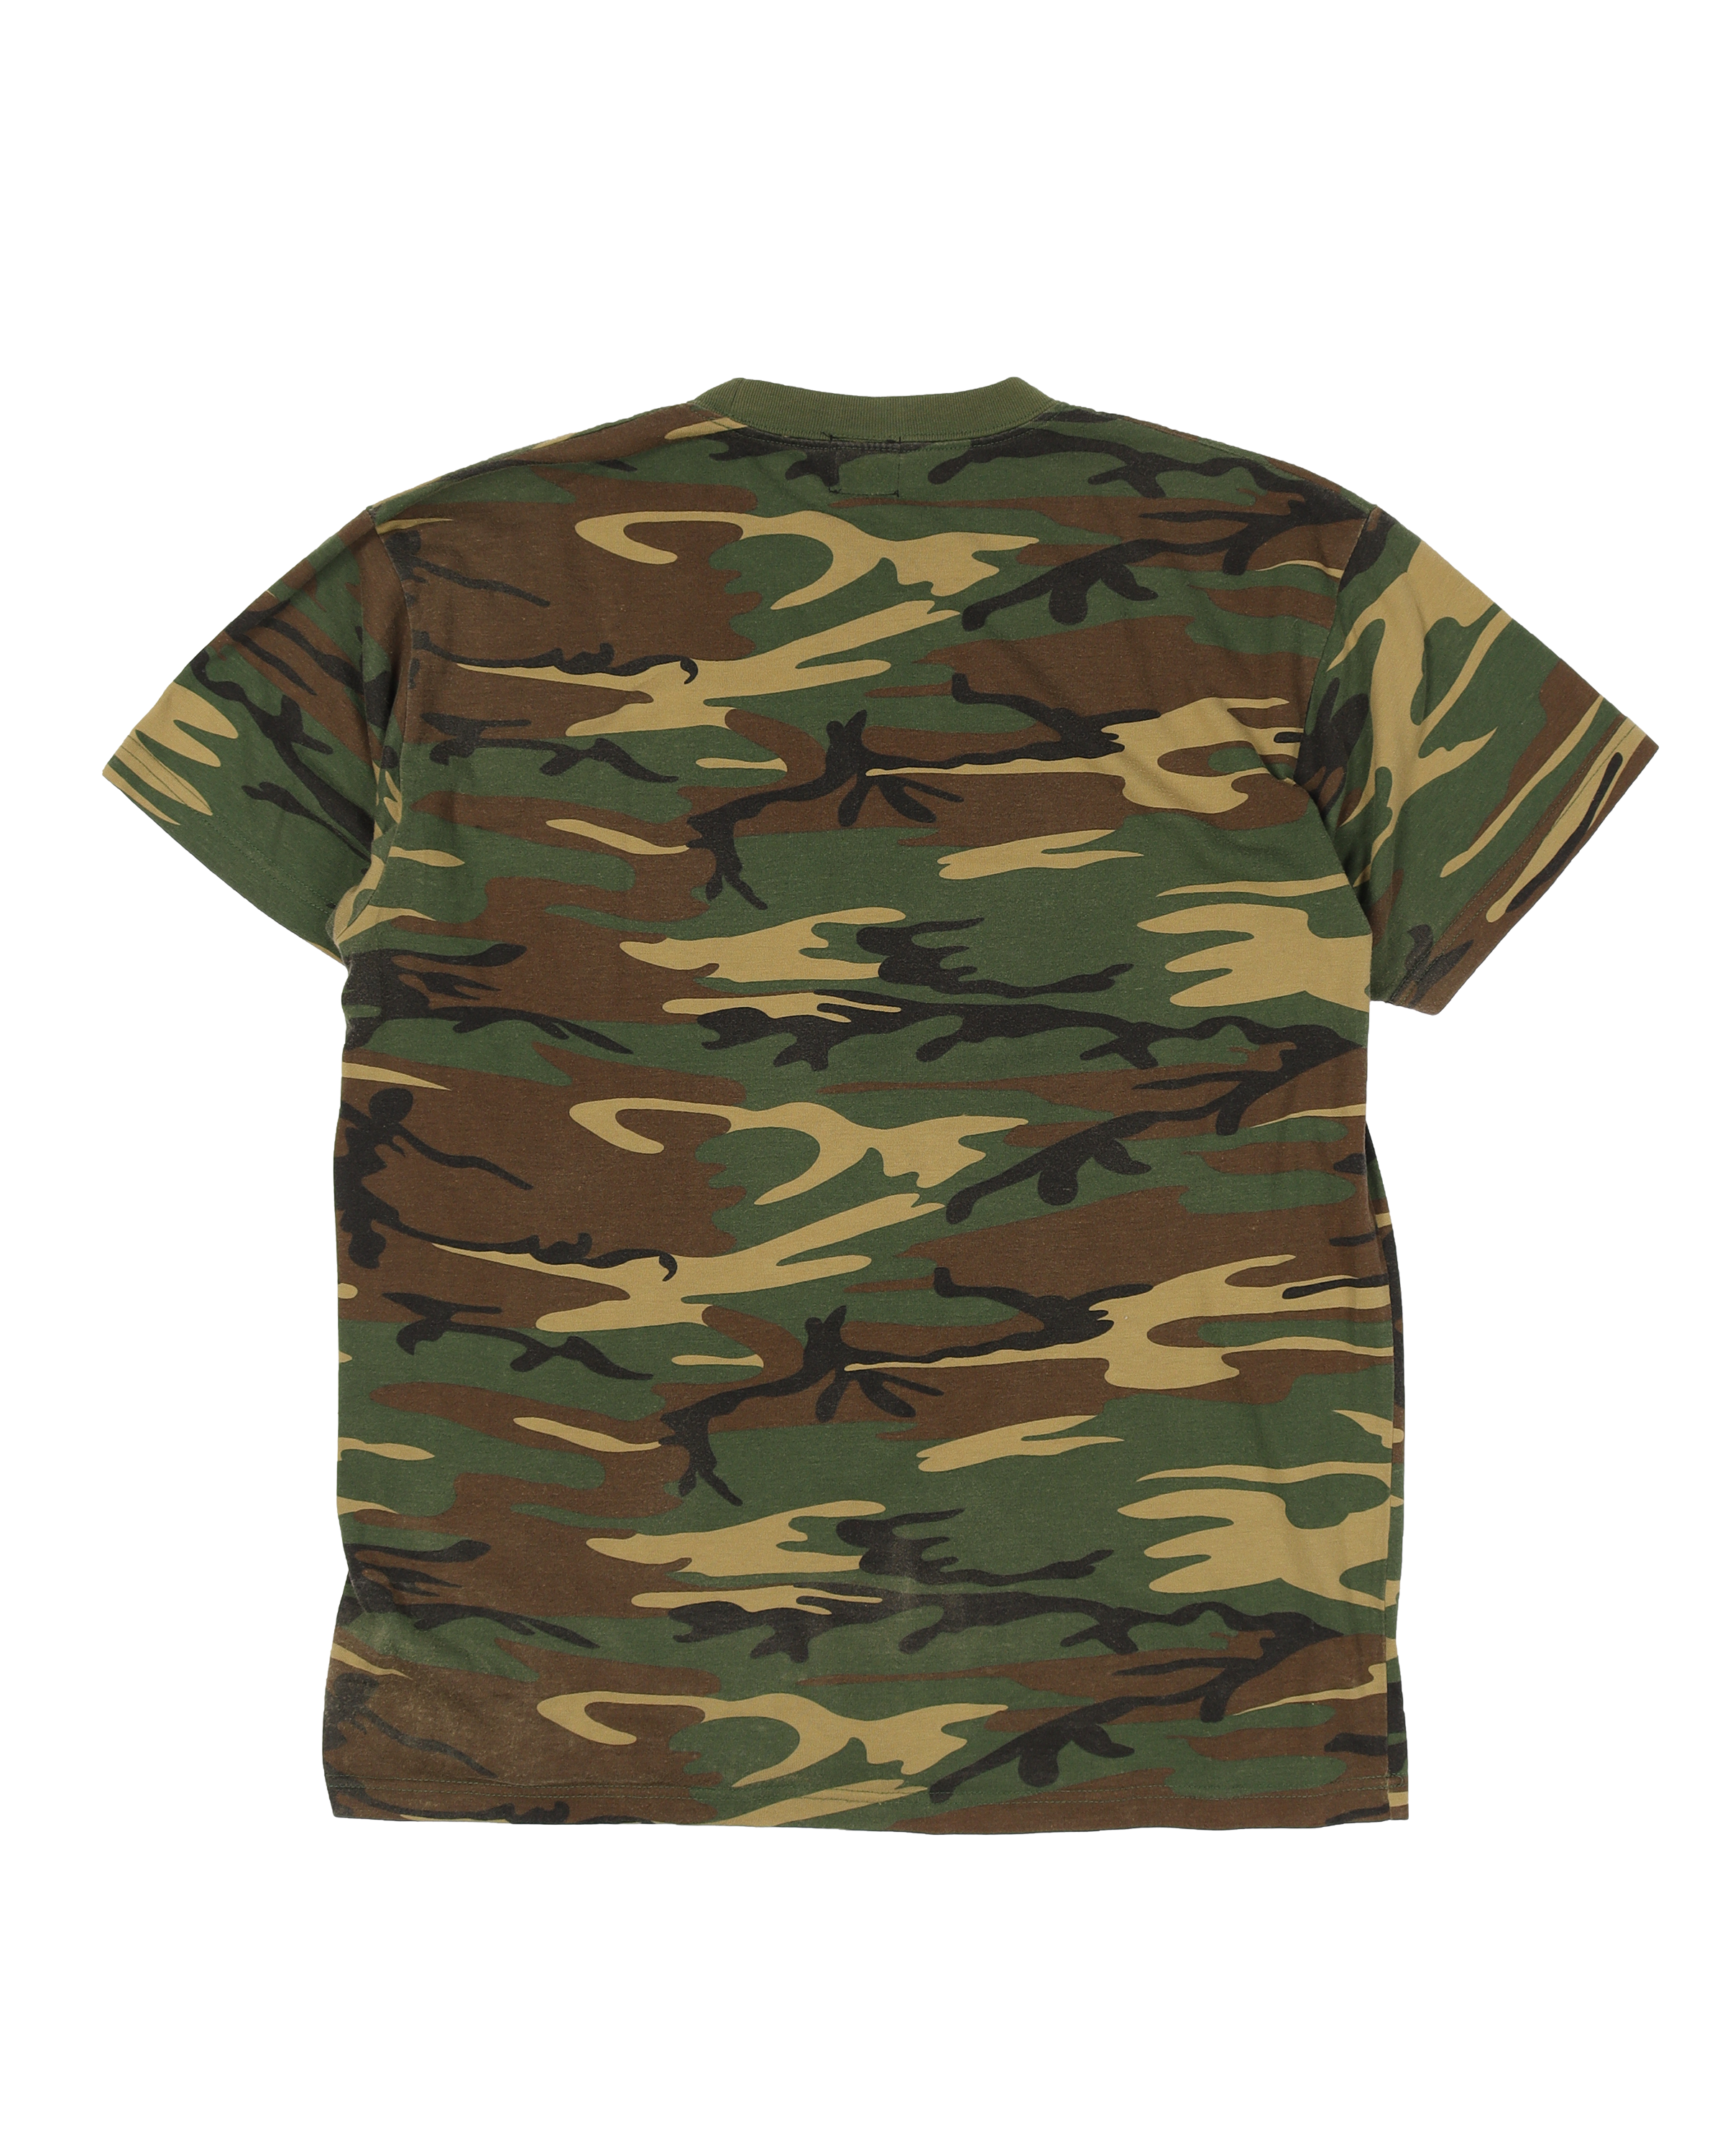 Born From Pain Mewto Camouflage T-Shirt